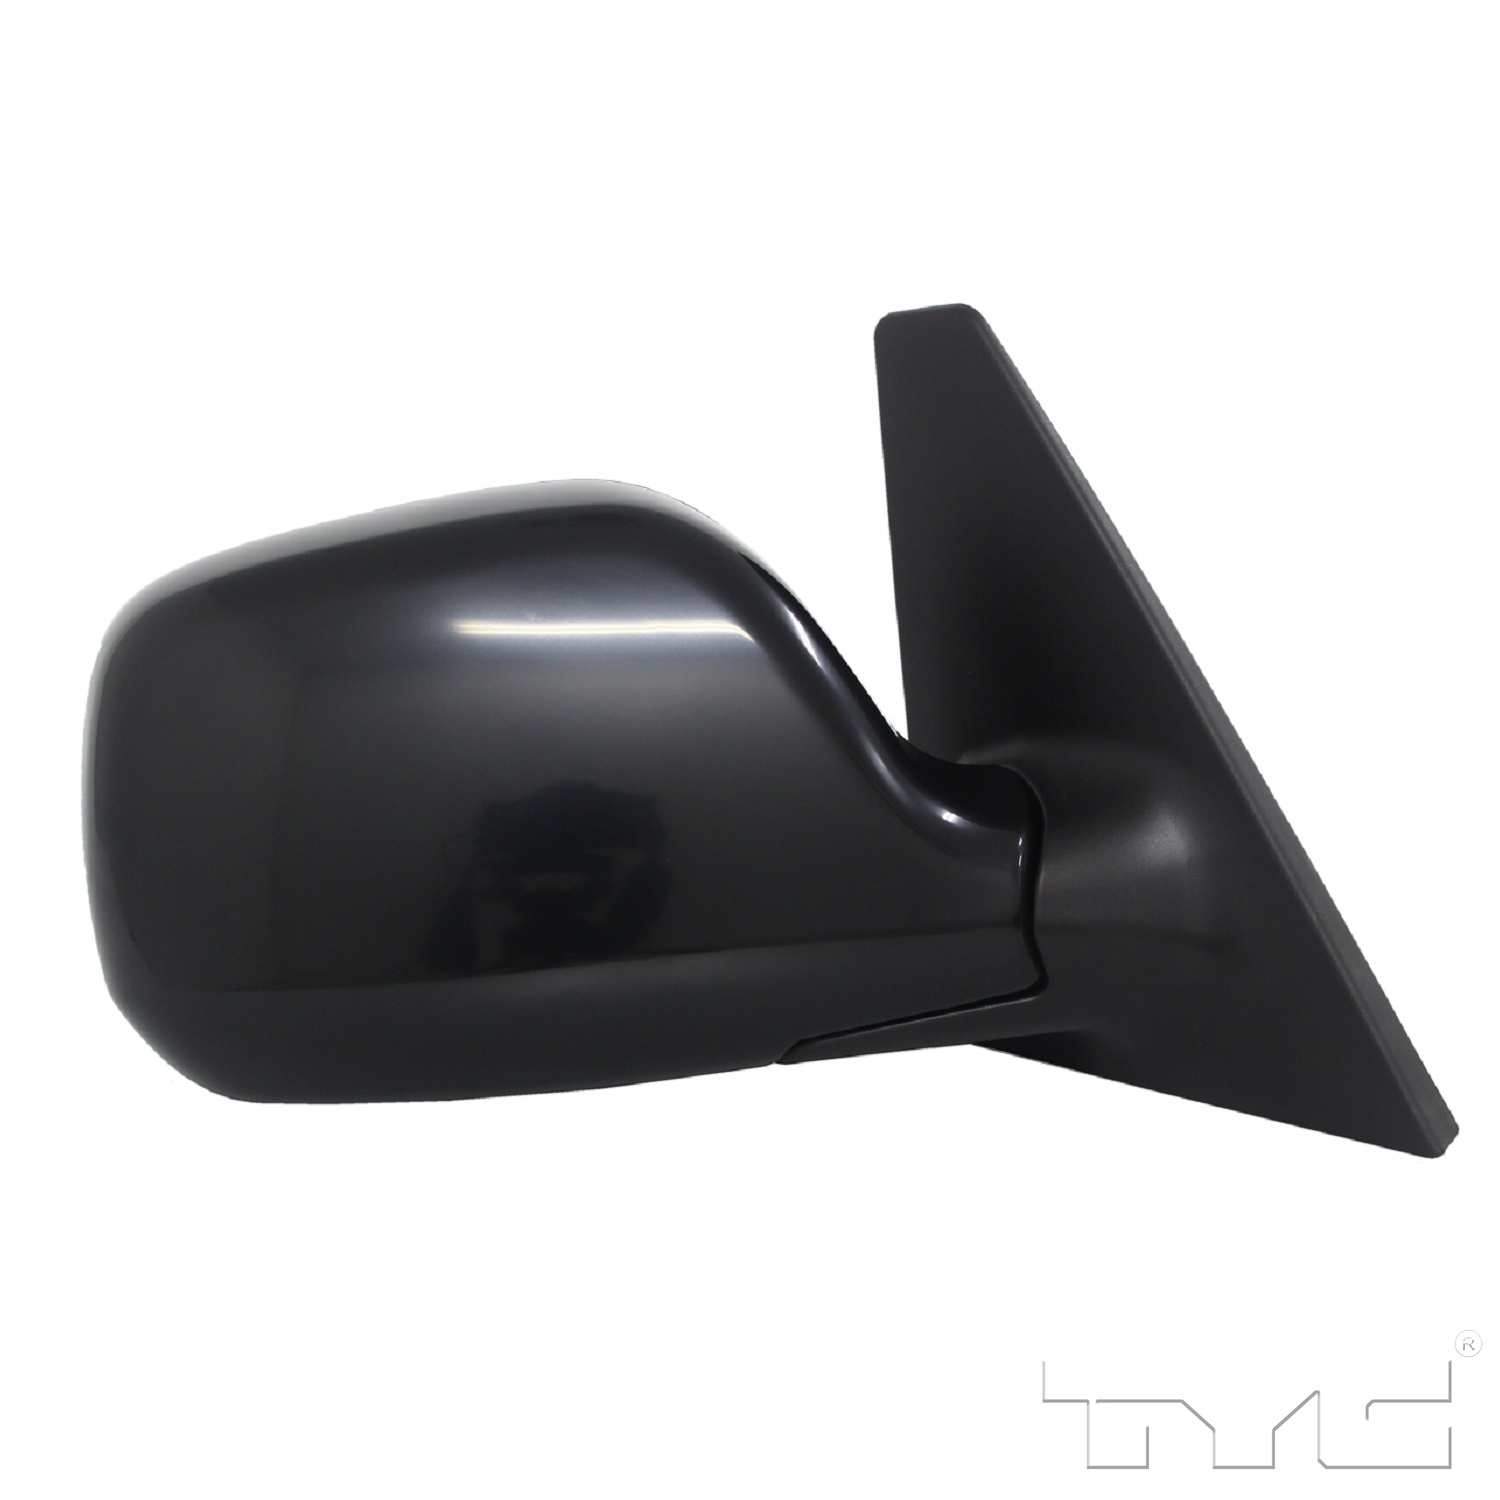 Aftermarket MIRRORS for SCION - XB, xB,04-06,RT Mirror outside rear view